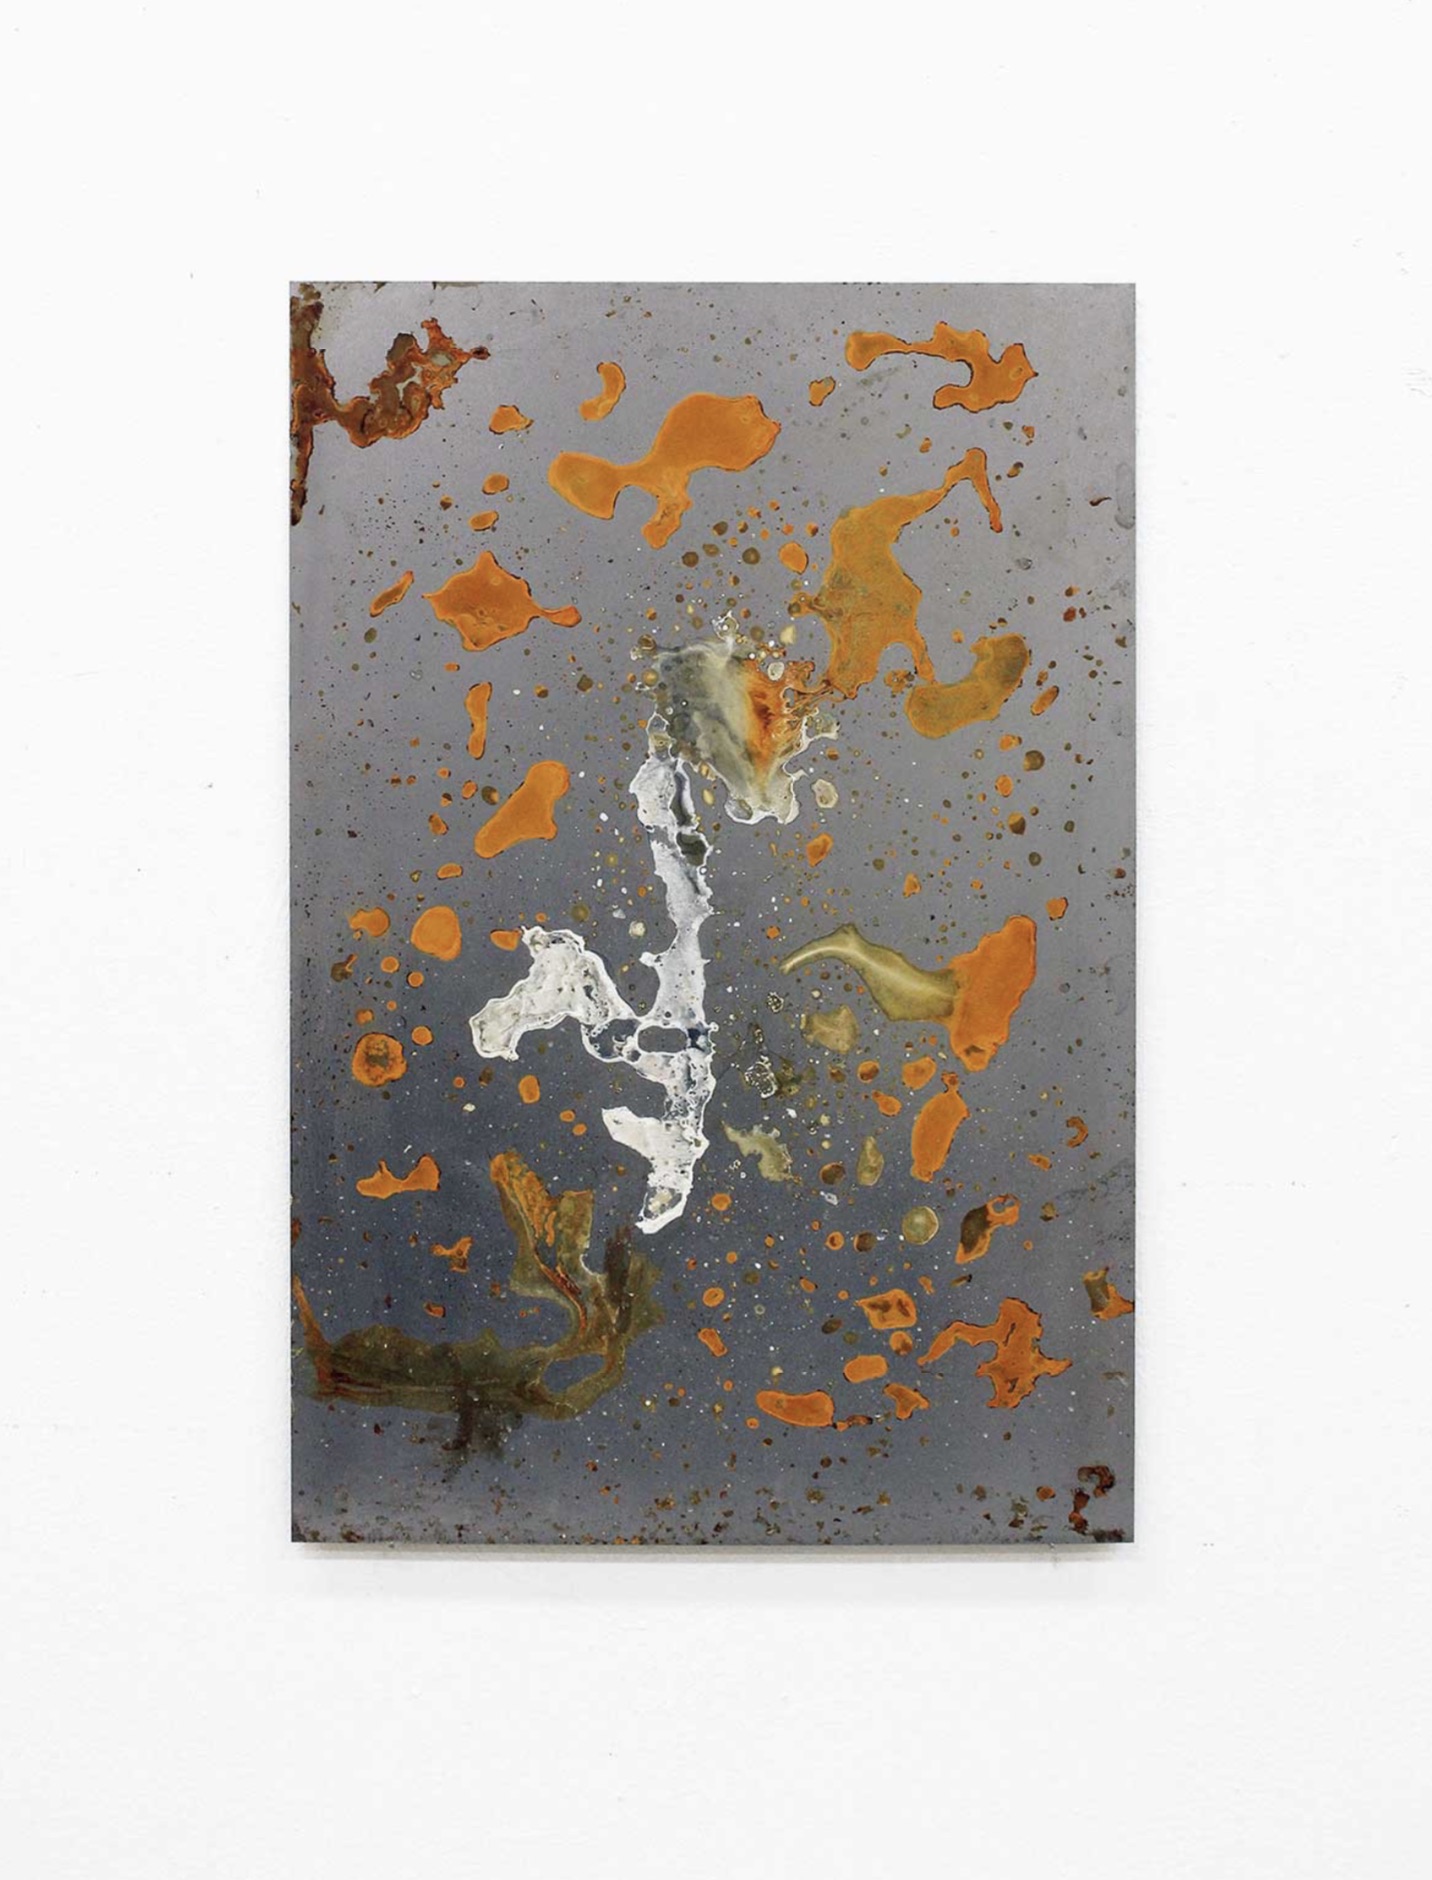 Untitled, 2015, Steel-plate, water, white paint Cm. 59 x 40